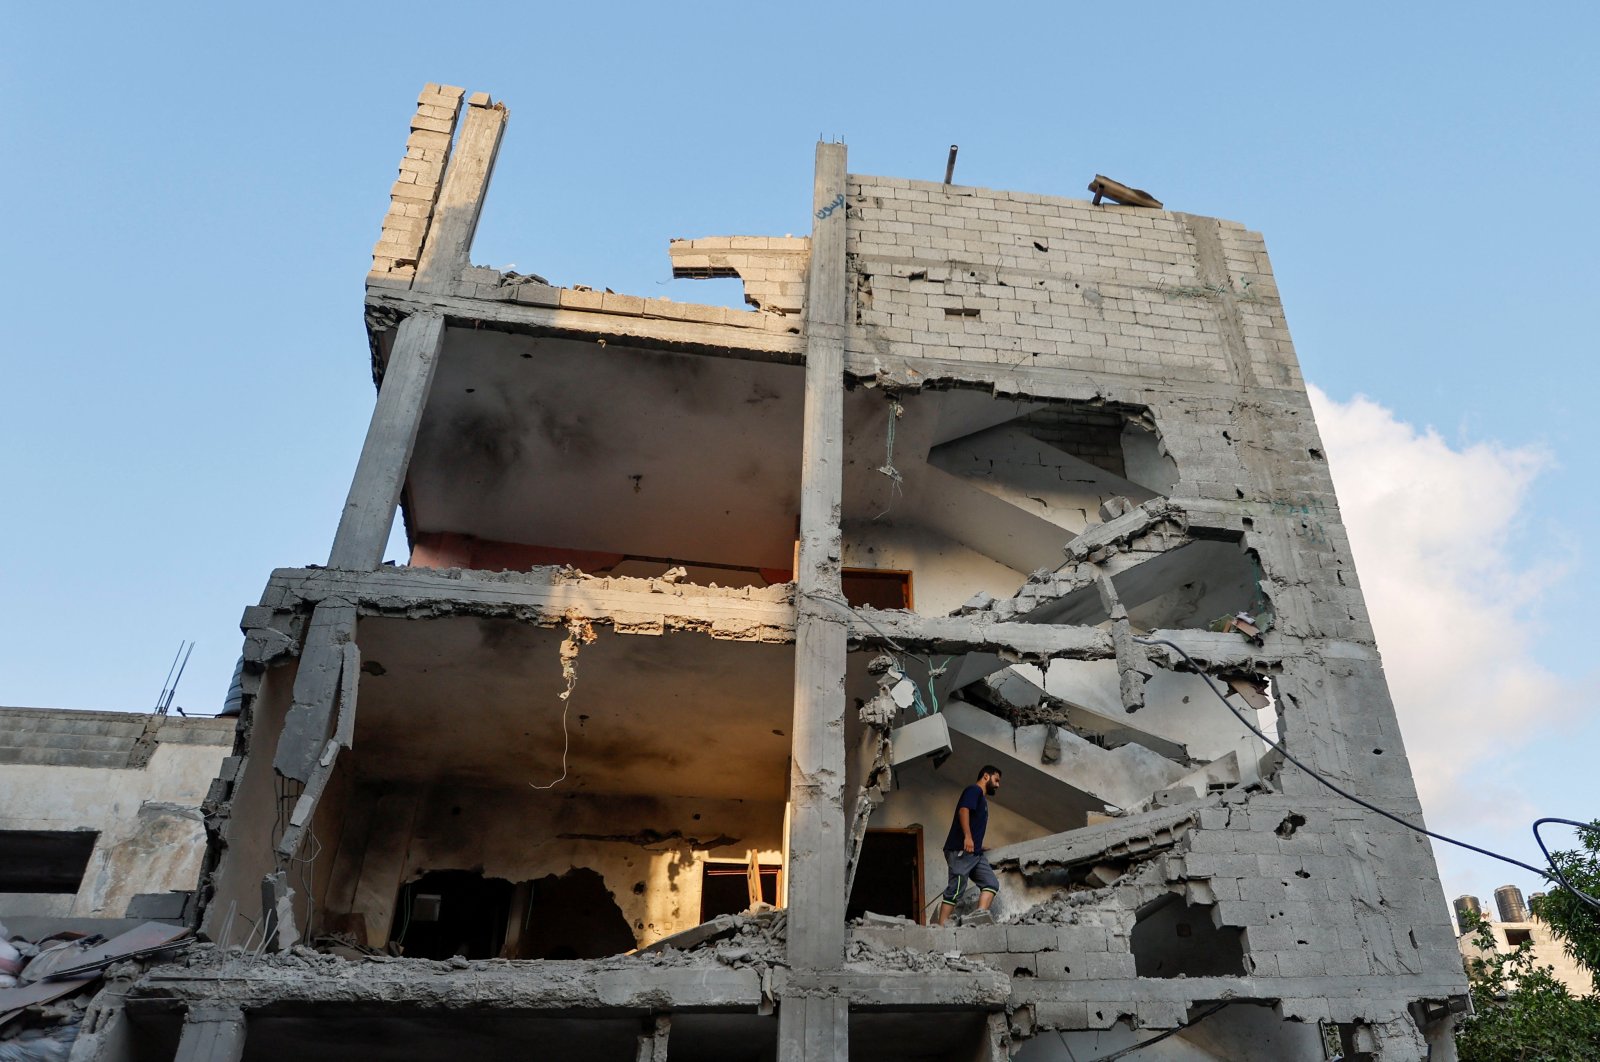 A Palestinian man walks through the ruins of a house at the scene where senior commander of Islamic Jihad group Khaled Mansour was killed in Israeli strikes, in Rafah in the southern Gaza Strip, Palestine, Aug. 7, 2022. (Reuters Photo)